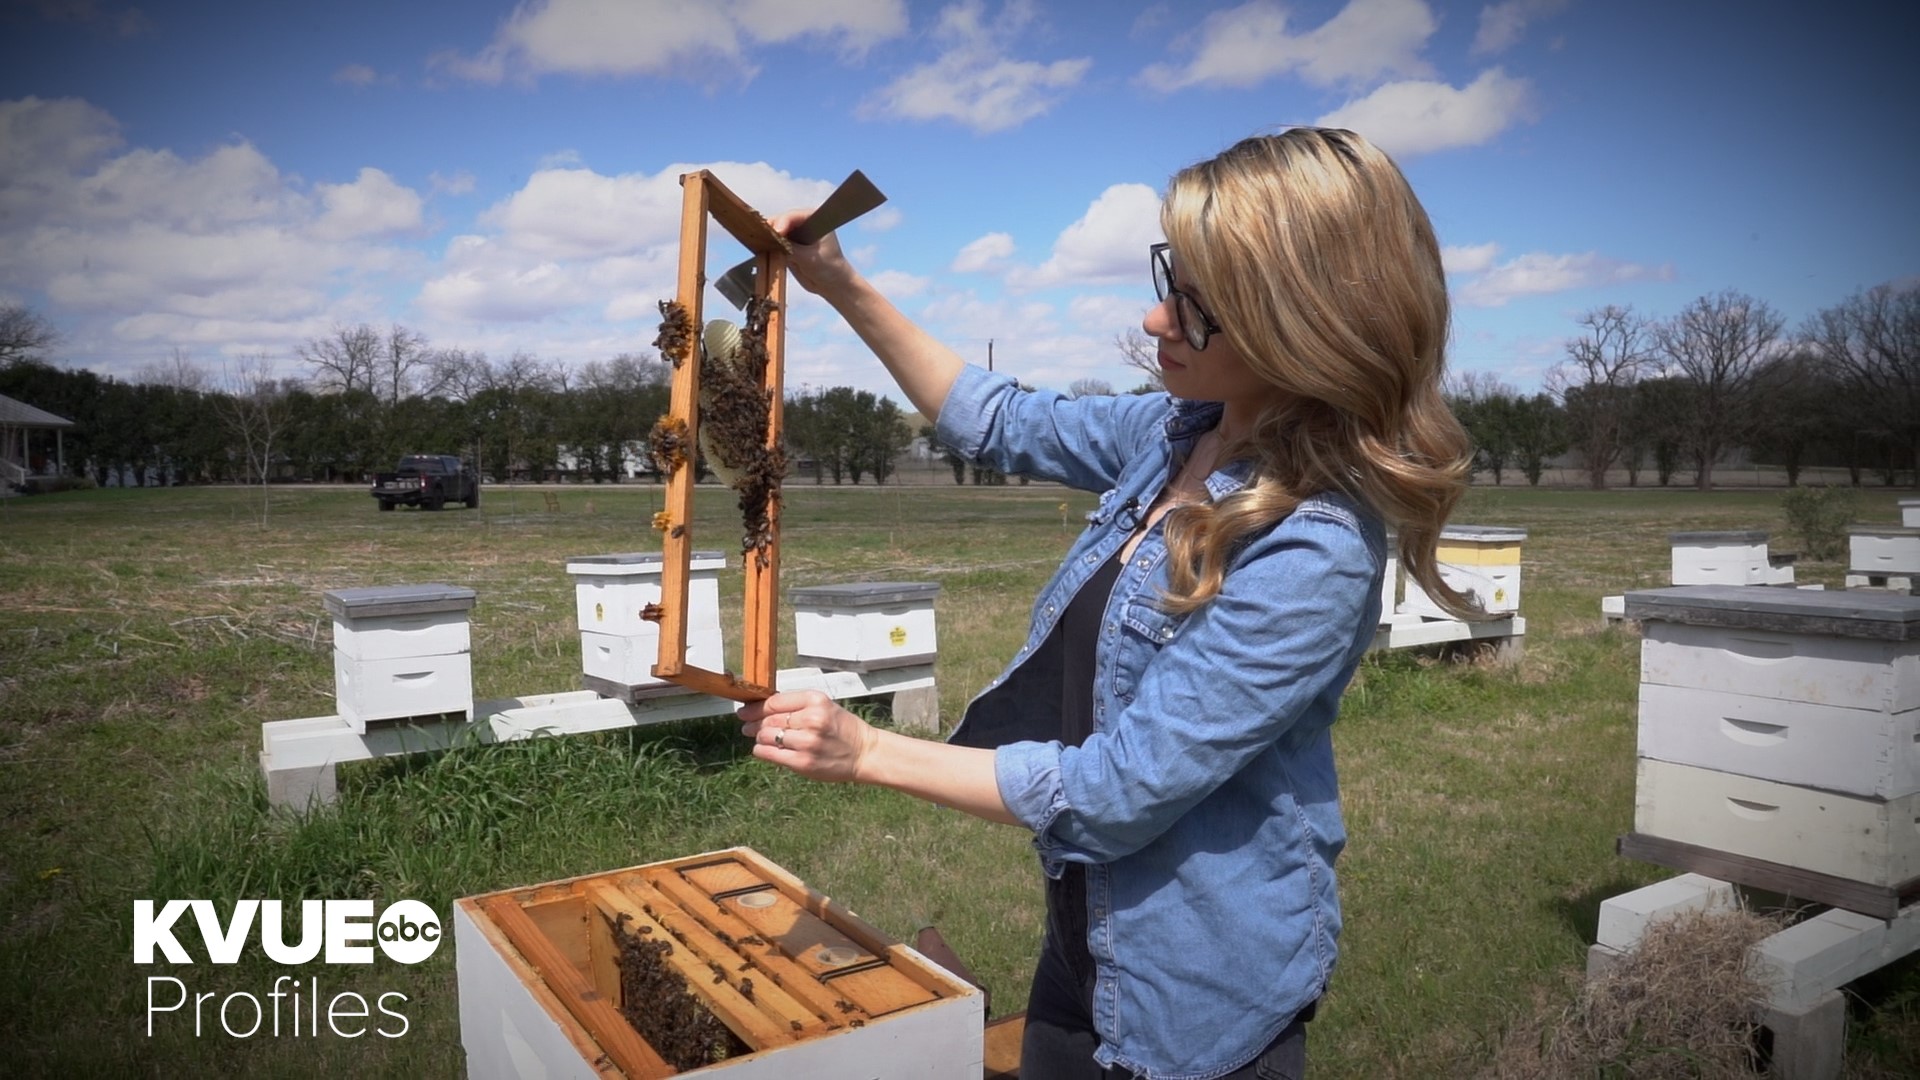 The internet is abuzz about Texas Beeworks, so we’re introducing you to the queen bee behind the viral business. Meet Erika Thompson.